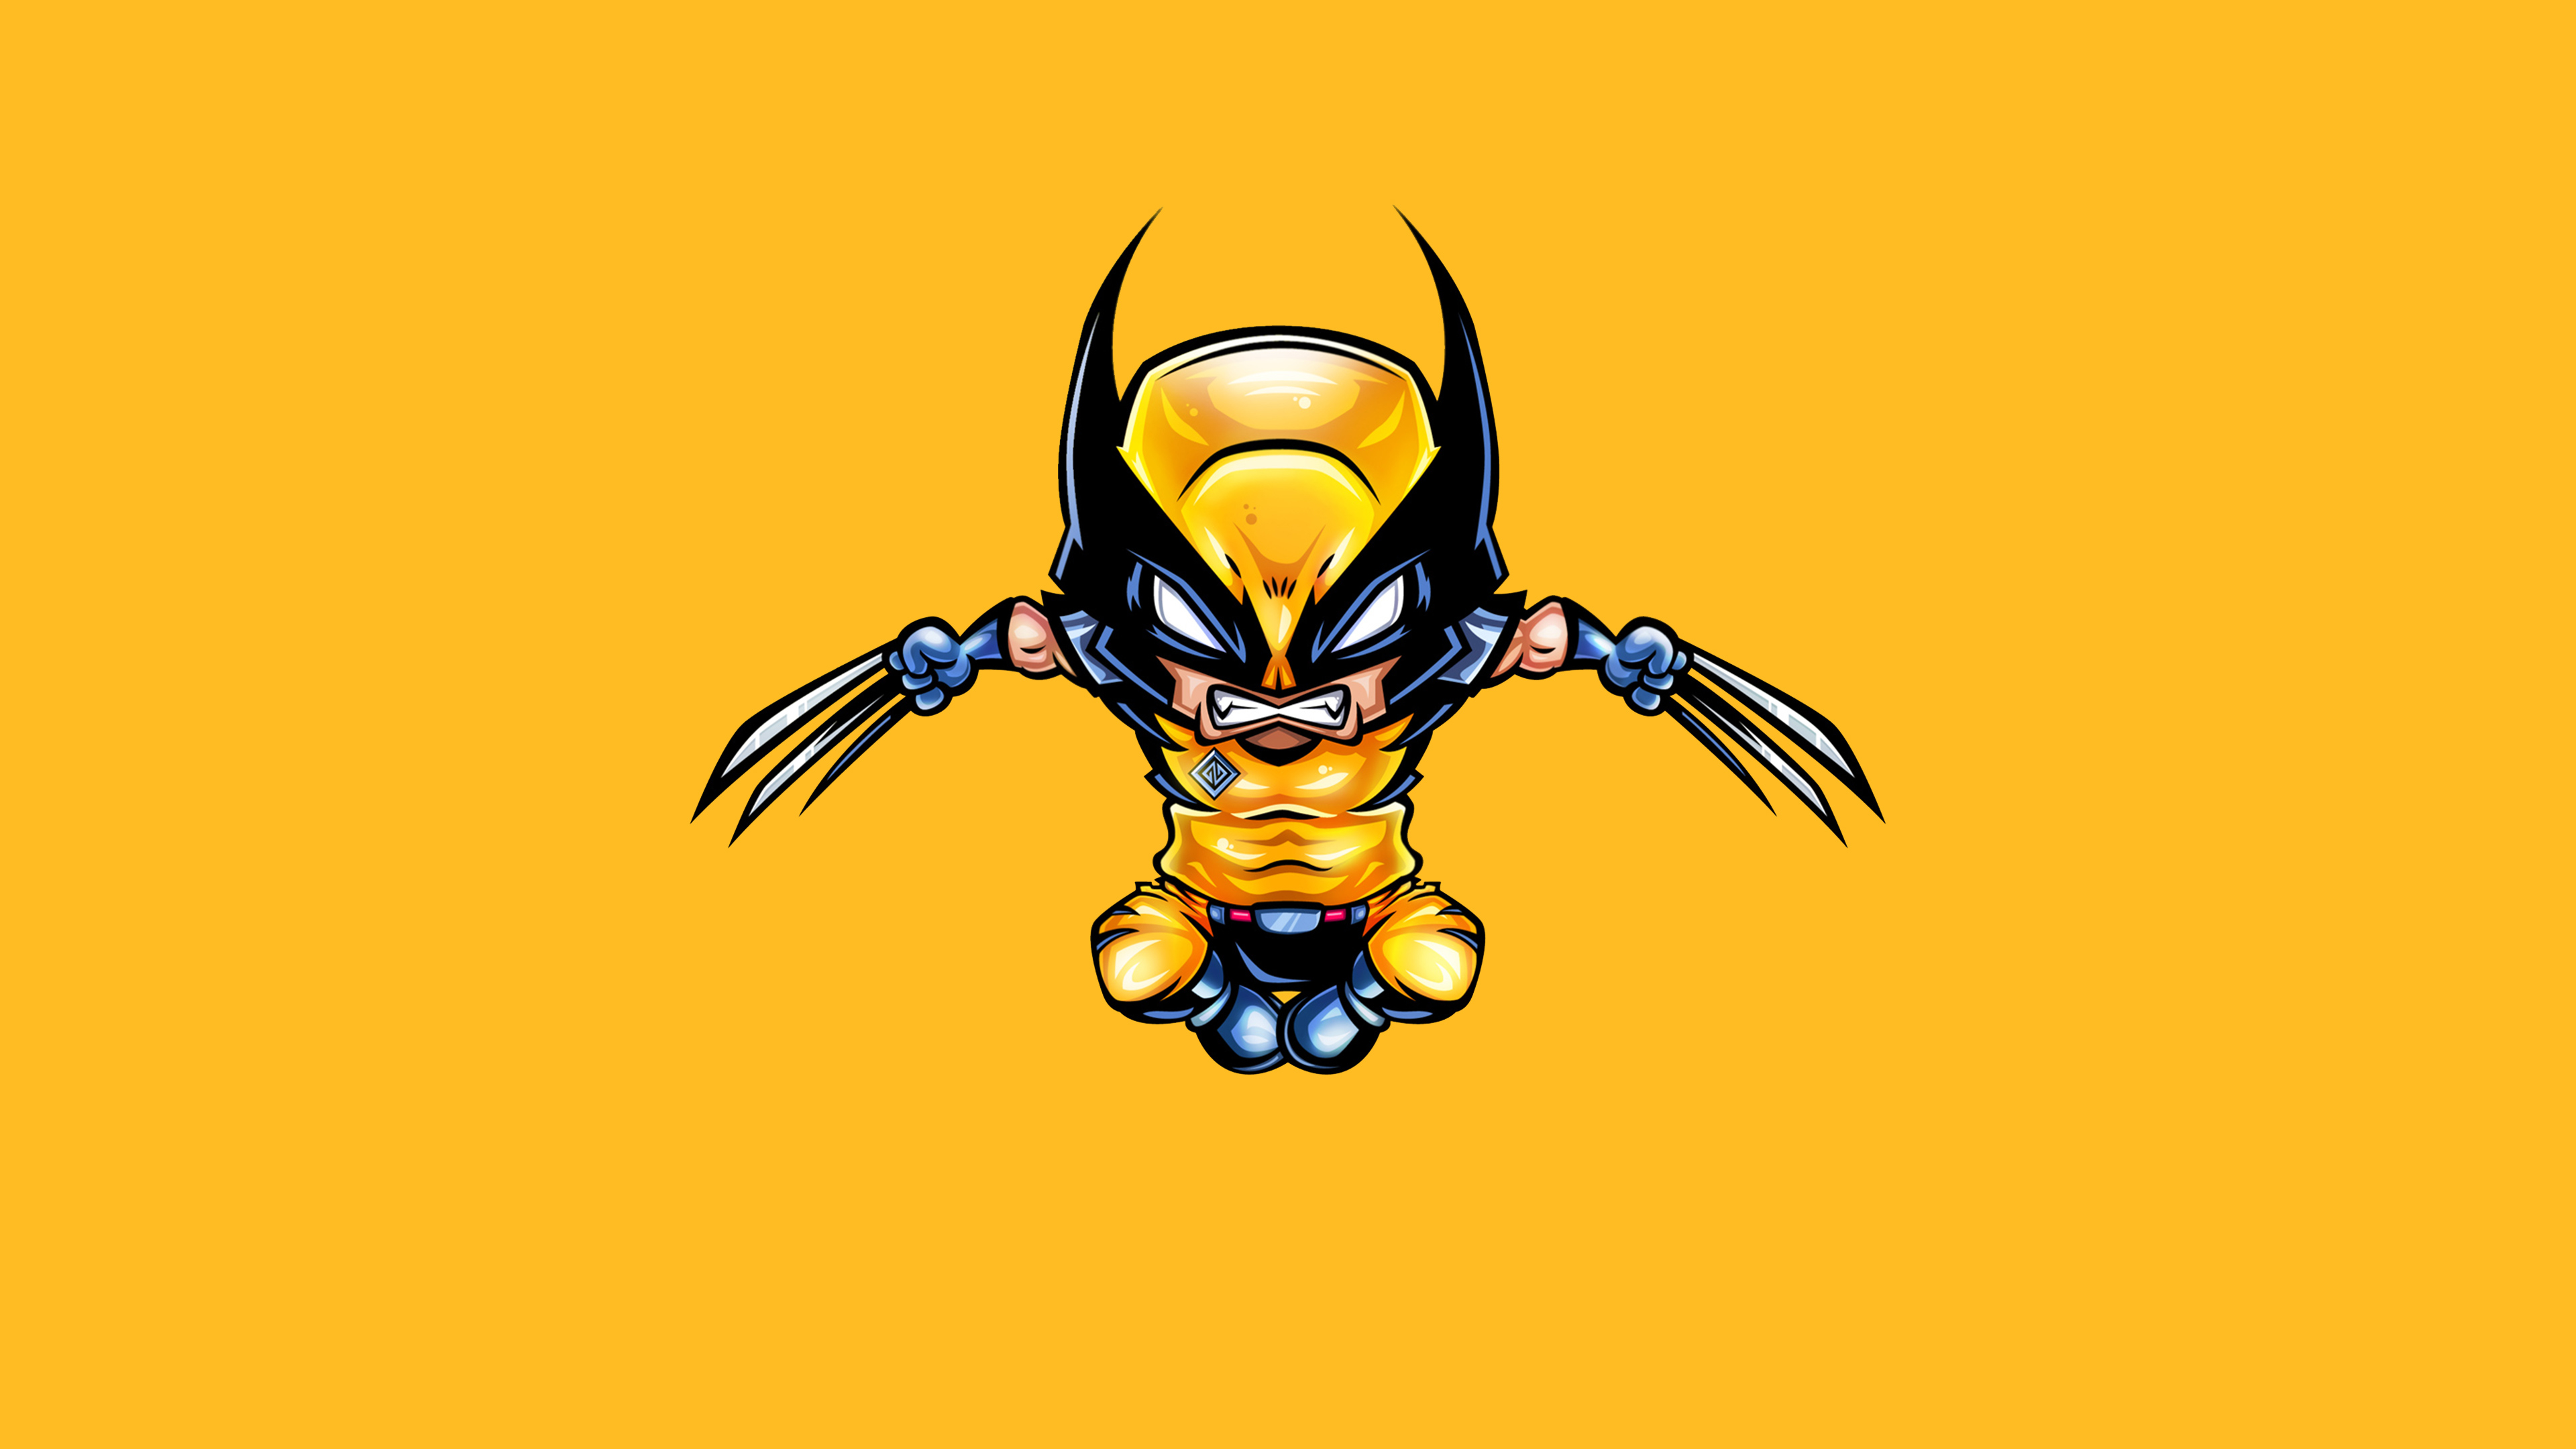 Wolverine Minimal Wallpaper Hd Superheroes 4k Wallpapers Images Photos And Background Wallpapers Den